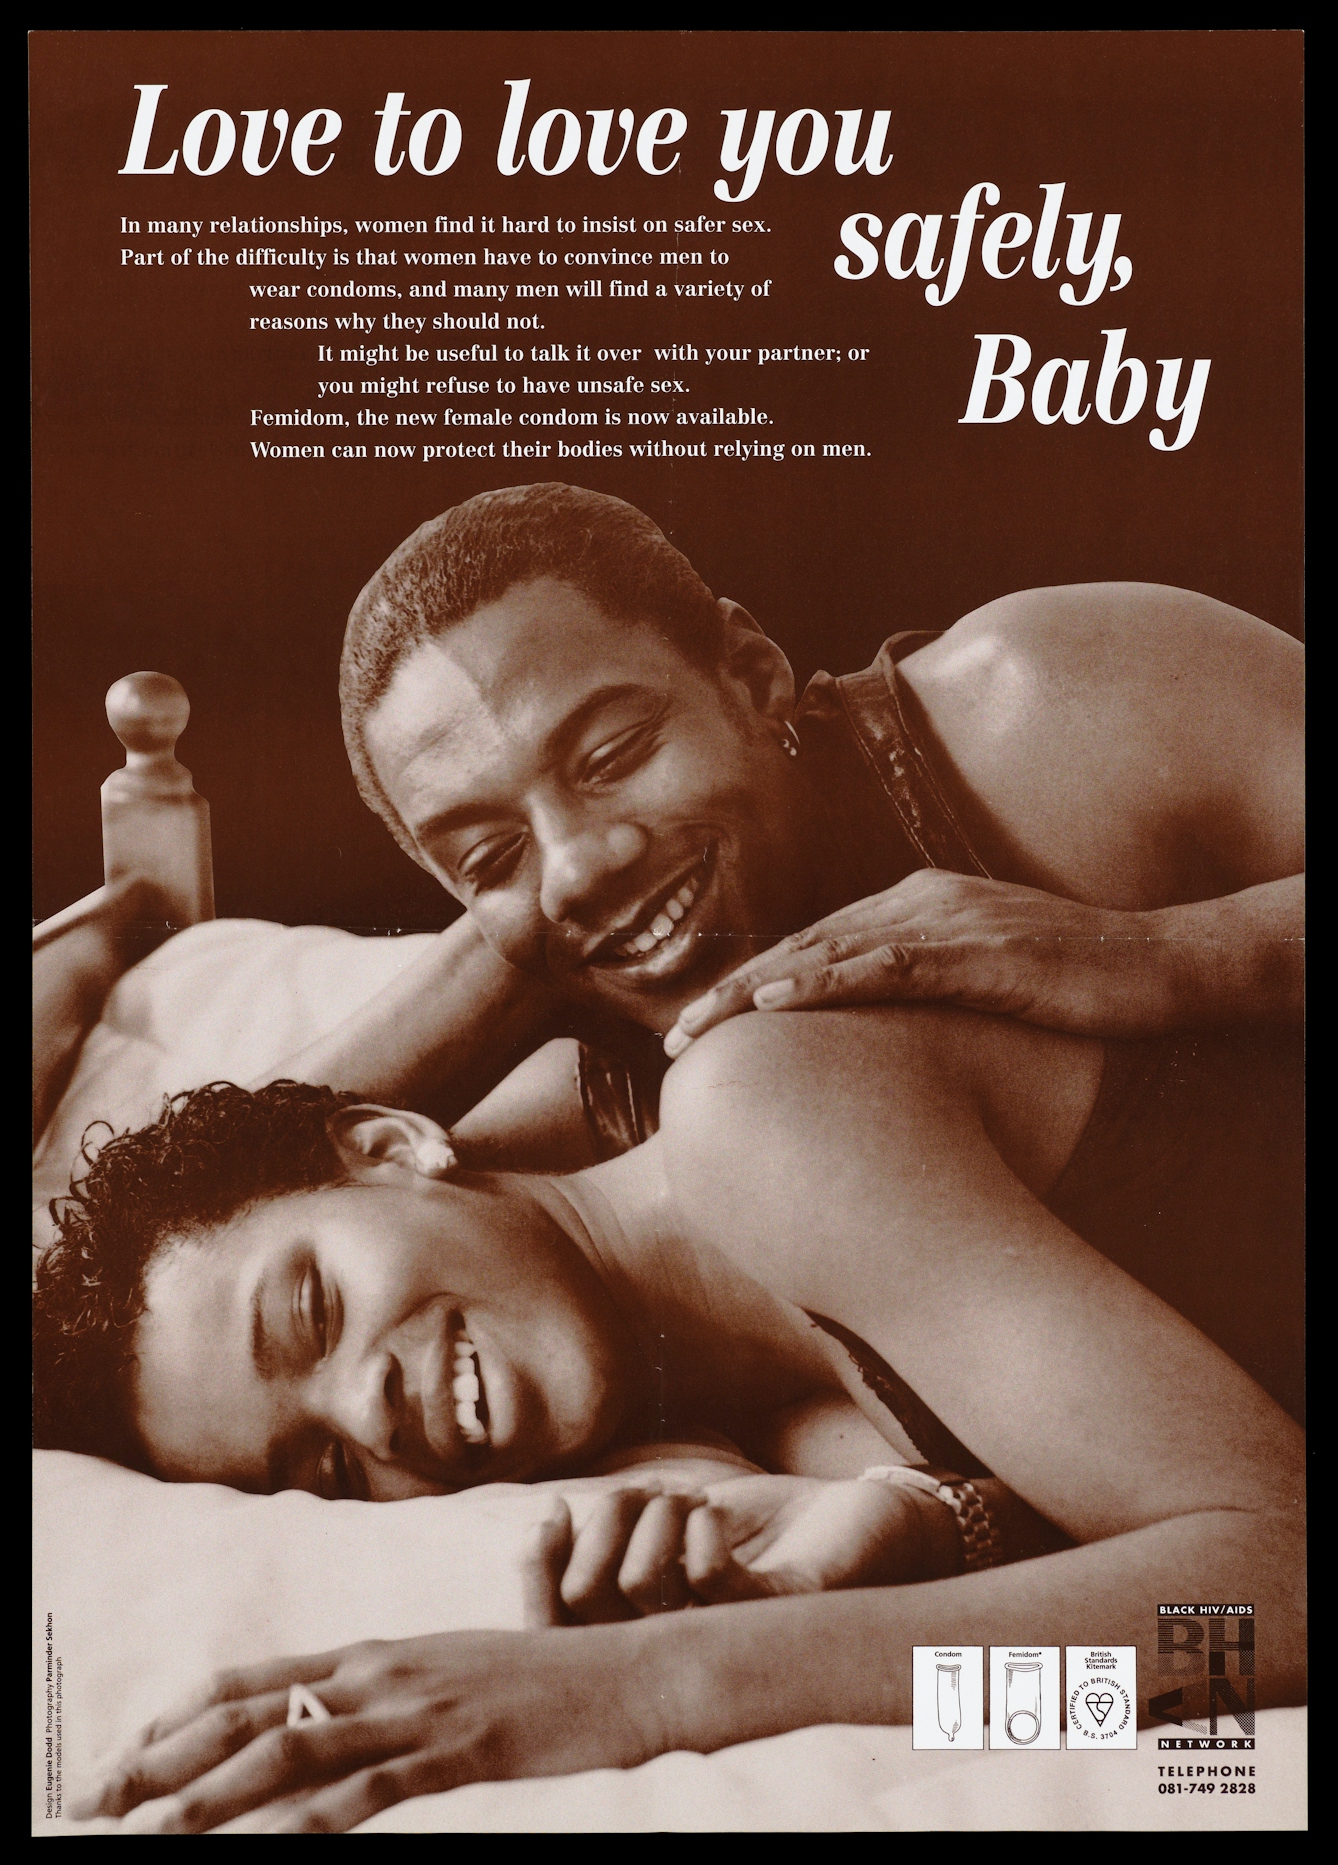 A black couple lie on a bed together smiling; advertisement for the new female condom by the Black HIV/AIDS Network. Brown lithograph, published in the 1990s.